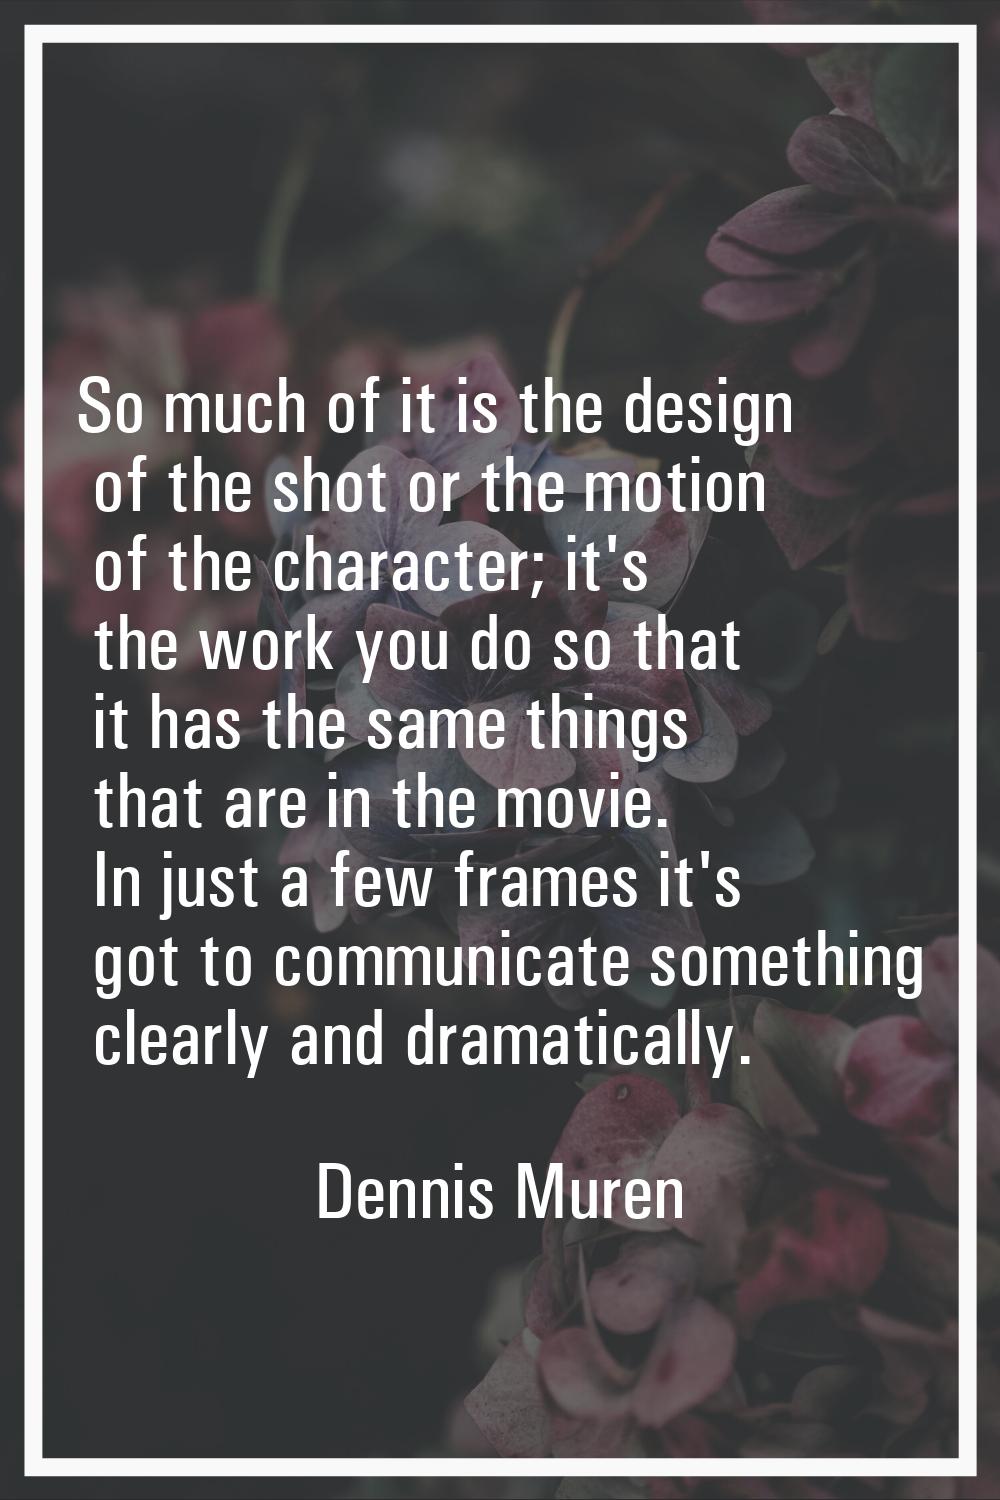 So much of it is the design of the shot or the motion of the character; it's the work you do so tha